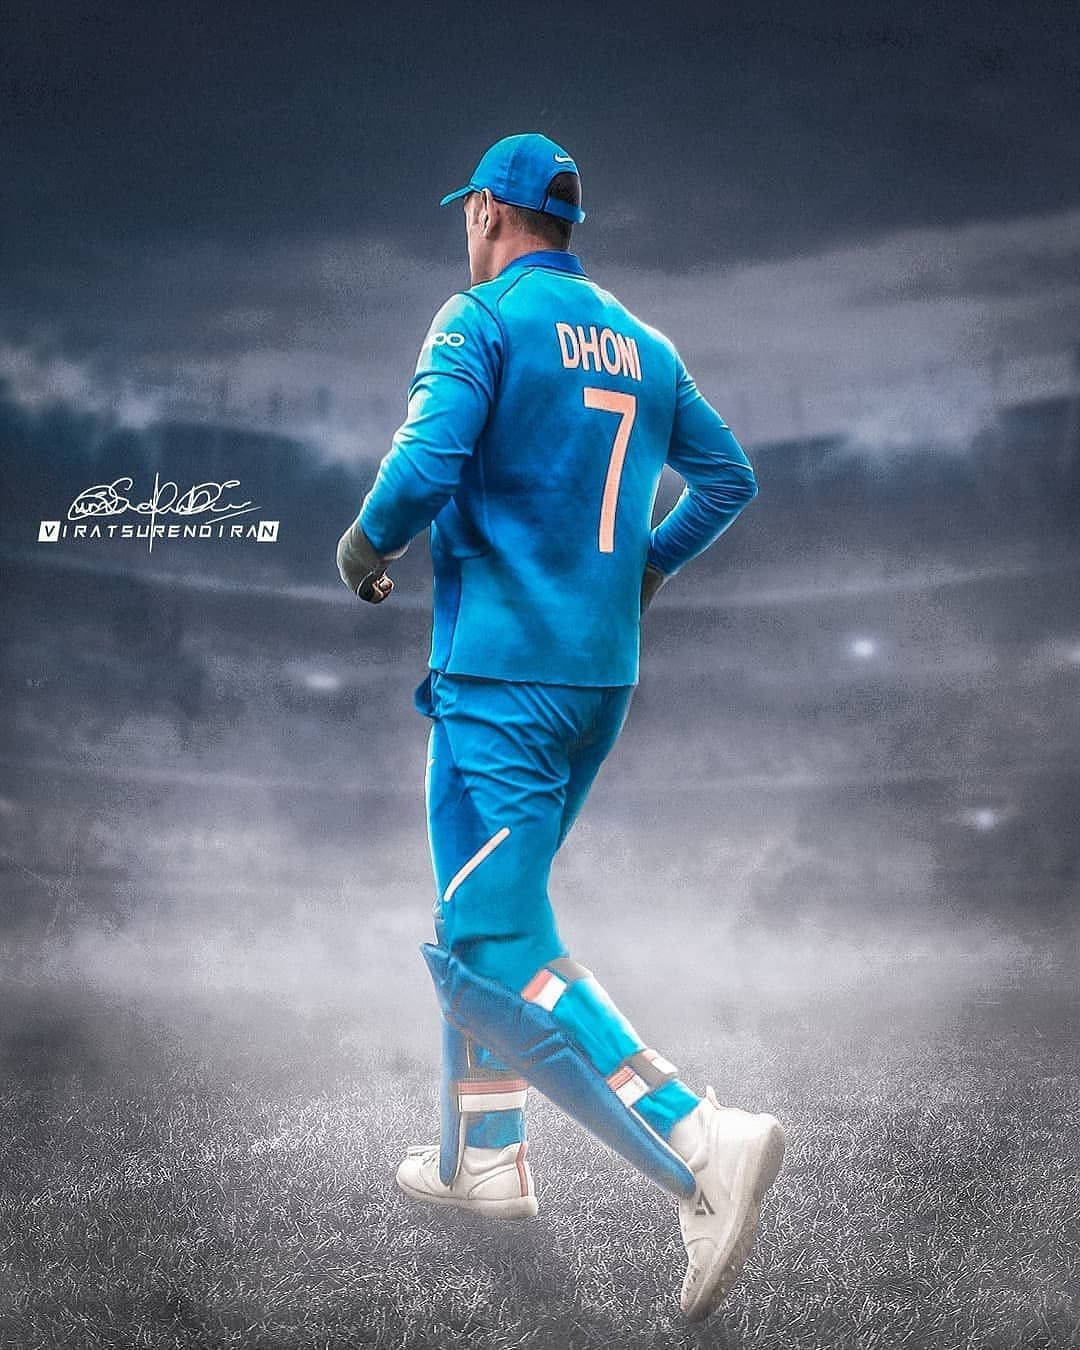 Dhoni 7 Running Into The Field Wallpaper